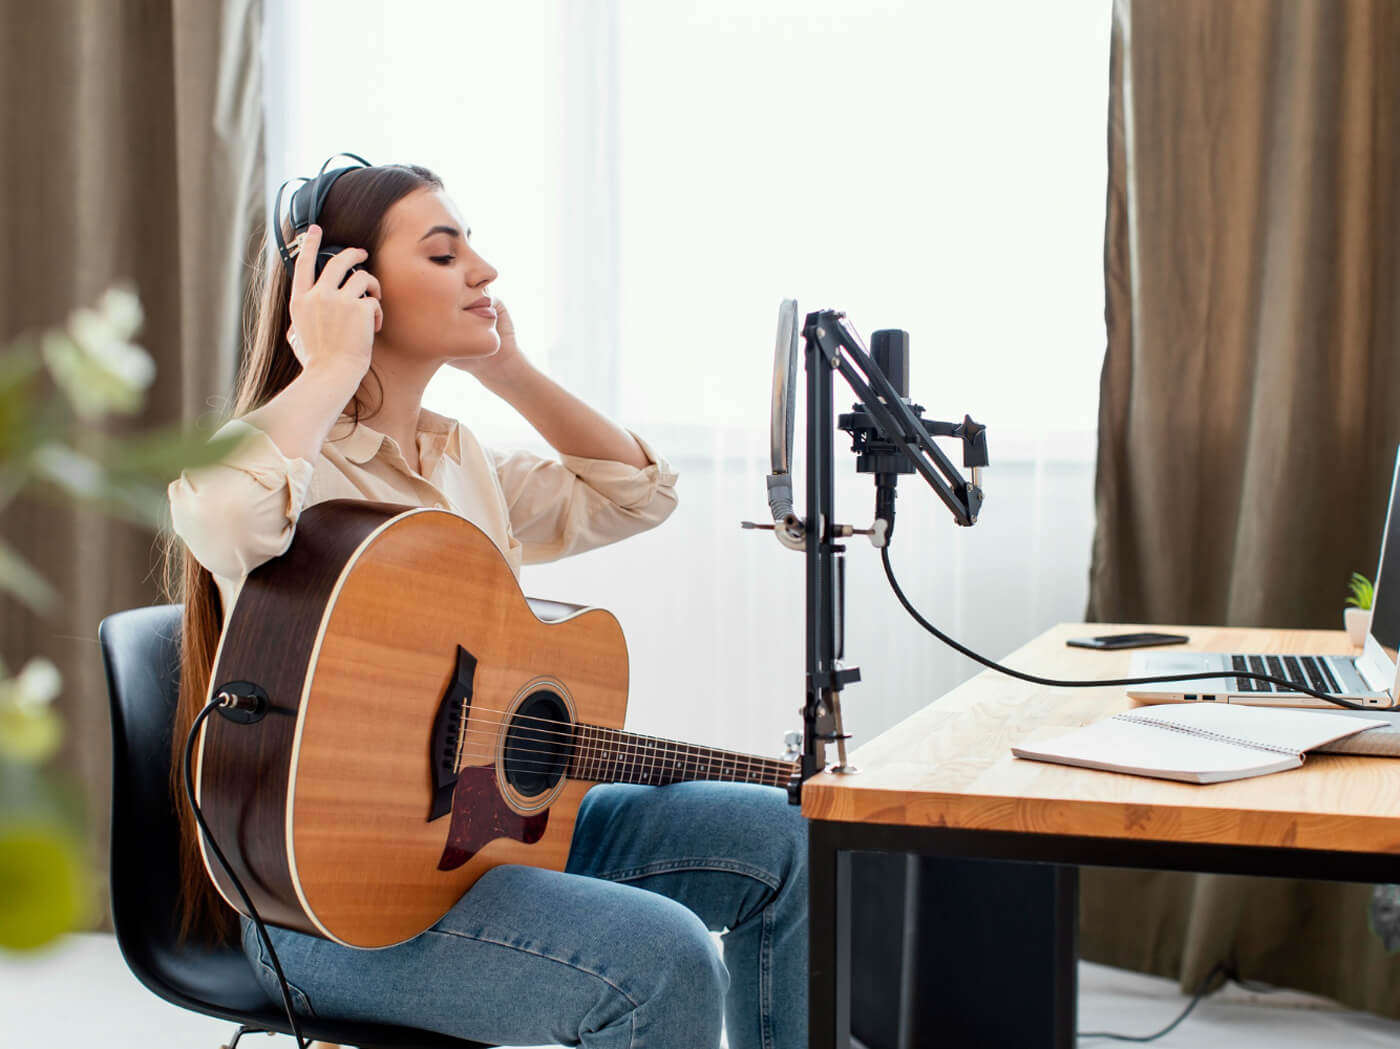 Recording Vocals at Home: How to Avoid 5 Common Mistakes